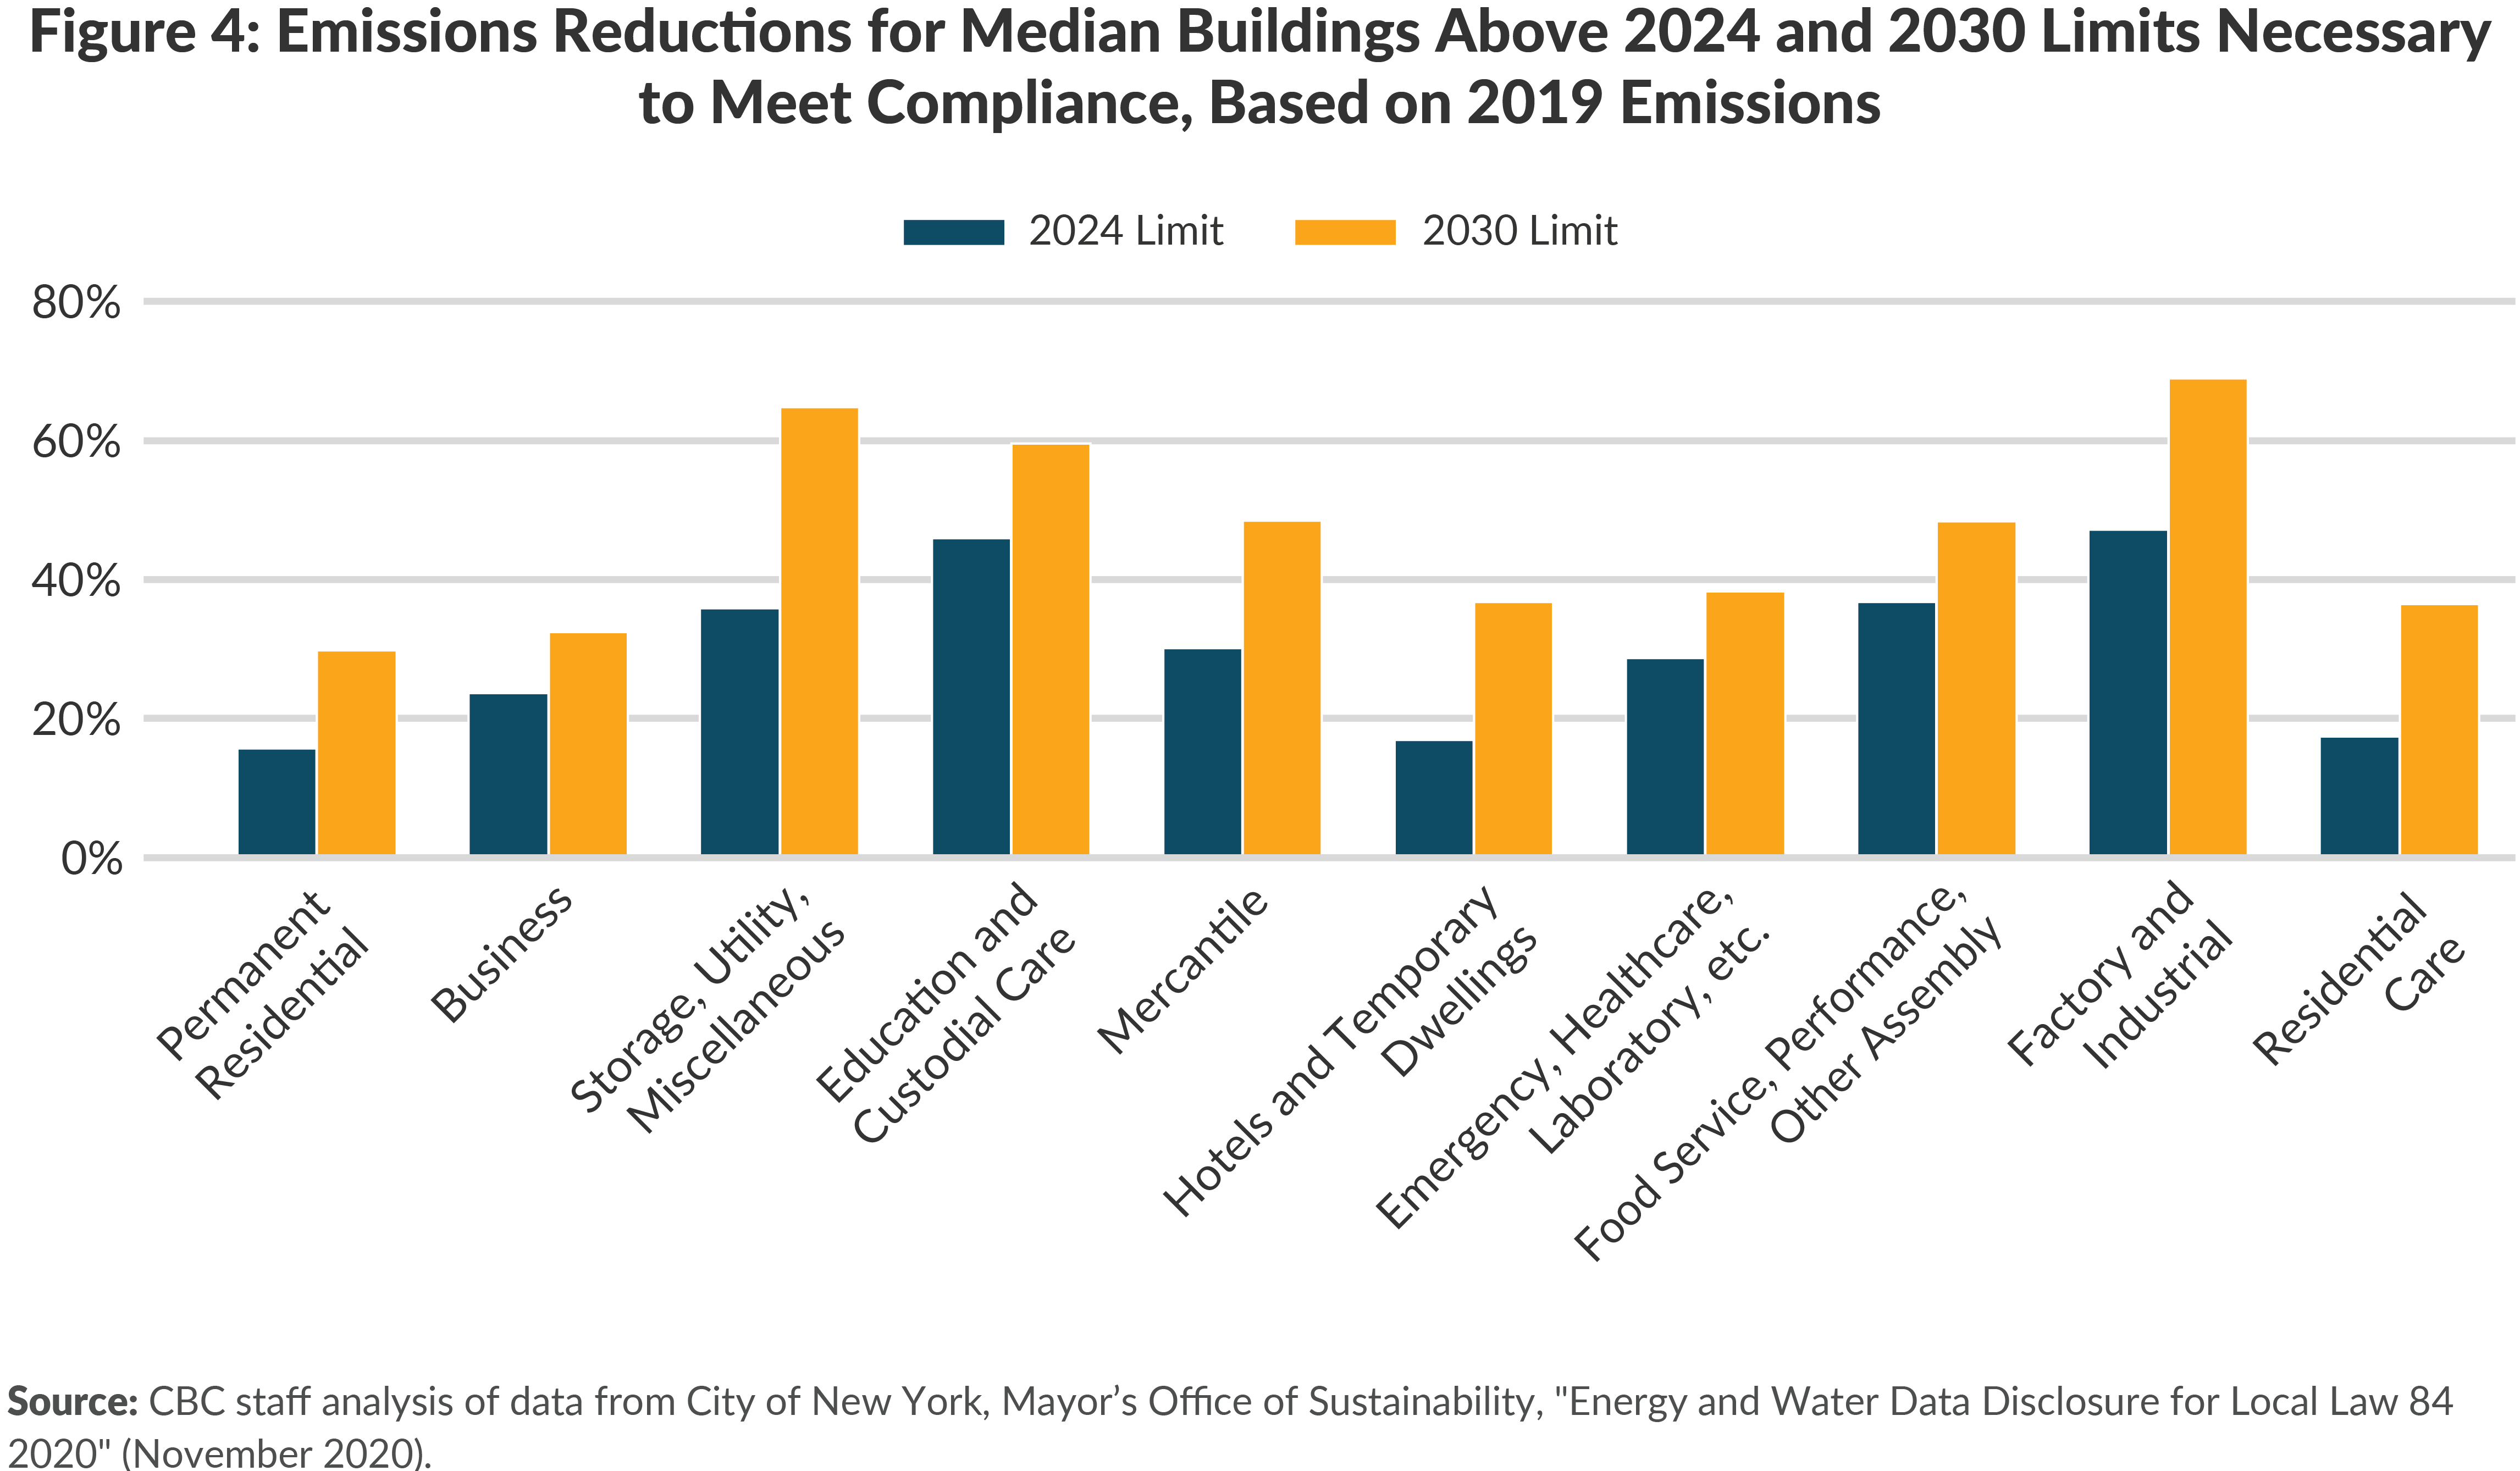 Figure 4. Emissions Reductions for Median Buildings Above 2024 and 2030 Limits Necessary to Meet Compliance, Based on 2019 Emissions